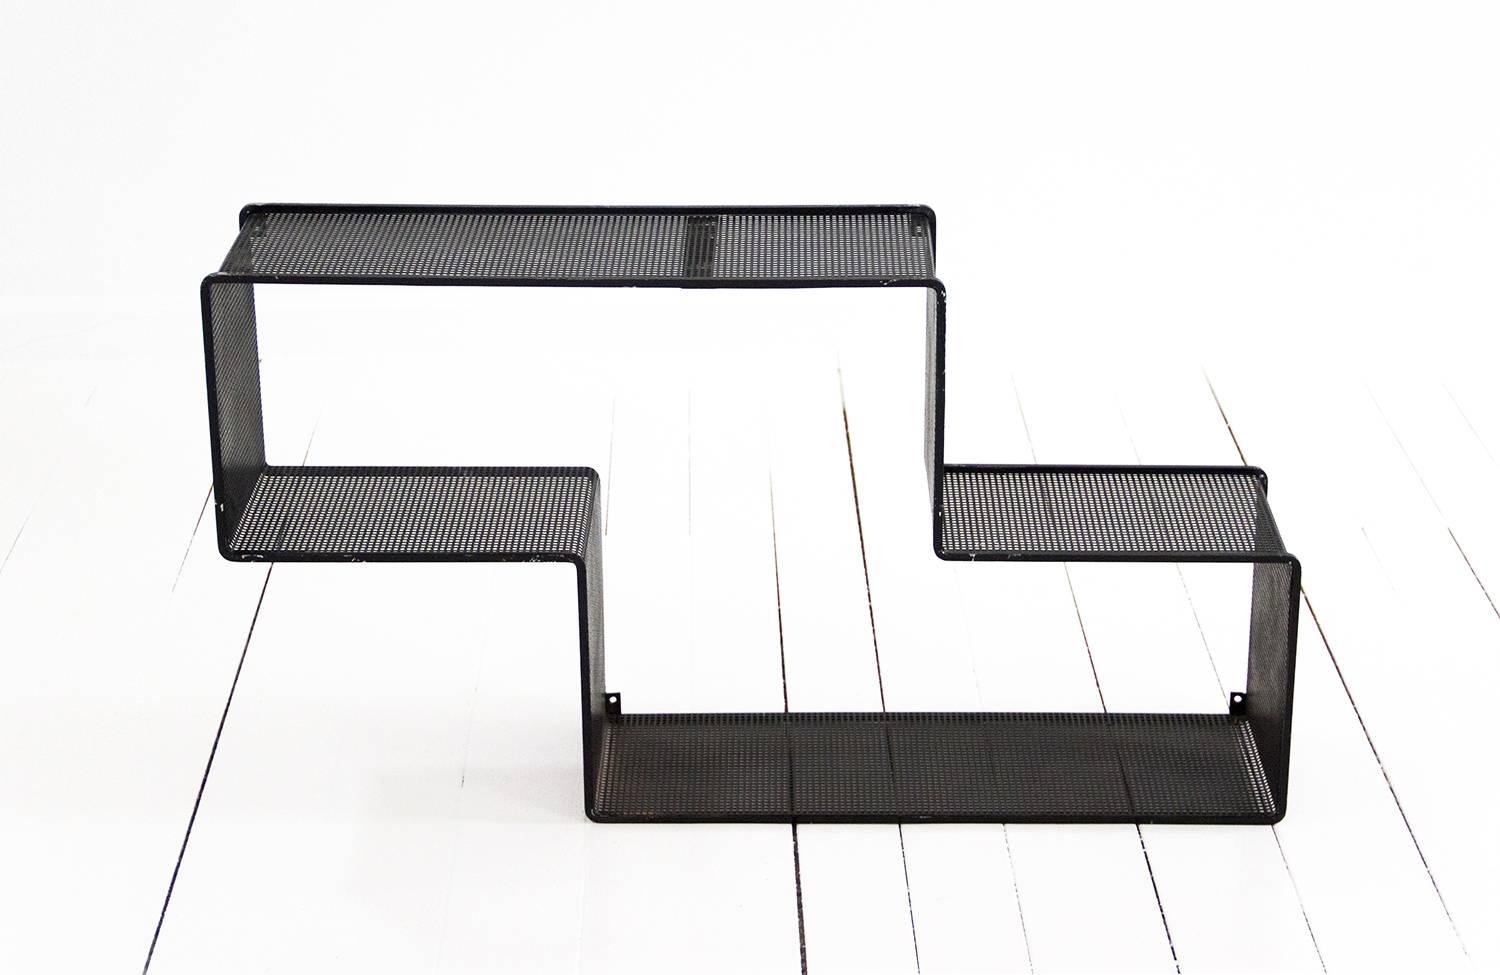 Black 'Dedal' wall shelf designed by Mathieu Matégot.
Made of perforated steel. Preserving the original patina. 
France, circa 1950. Manufactured in France by Ateliers Matégot.